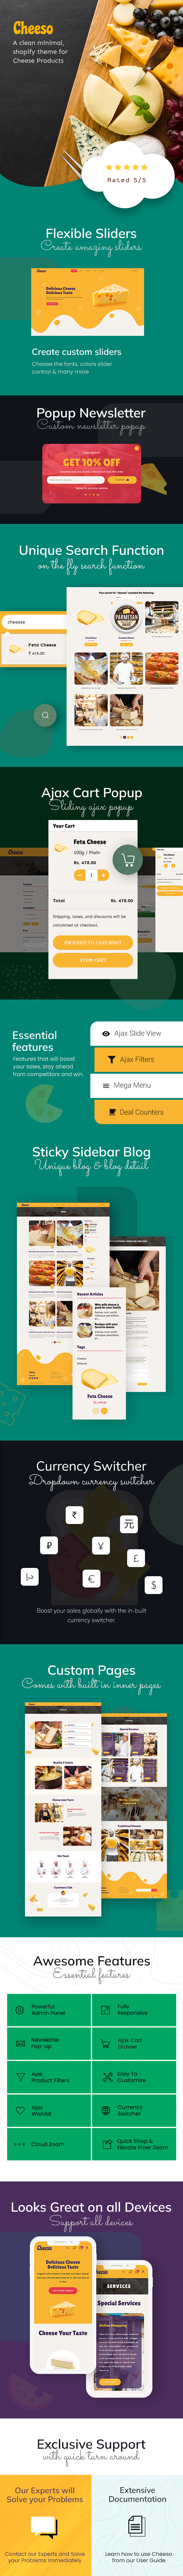 Cheeso | Organic, Dairy Milk Products & Food Shopify Theme - 1